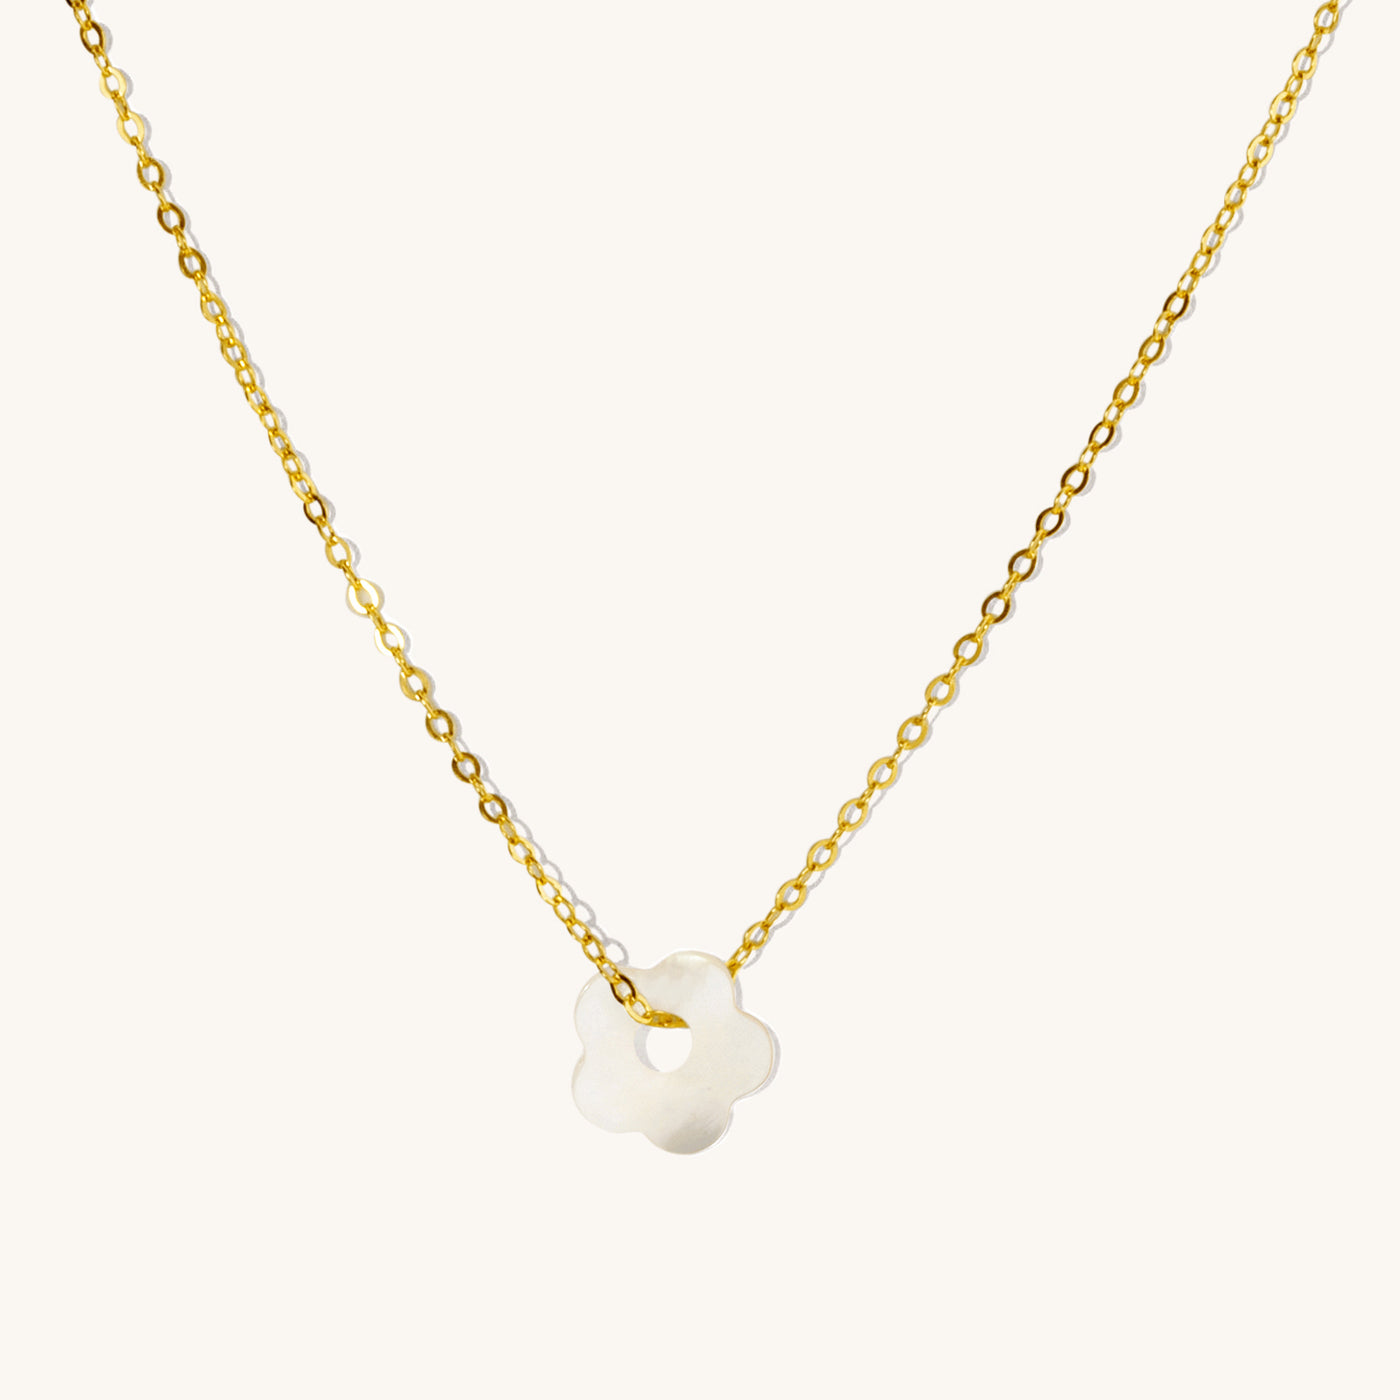 Single Pearl Pendant Necklace / 14k Rose Gold Filled / Ivory White